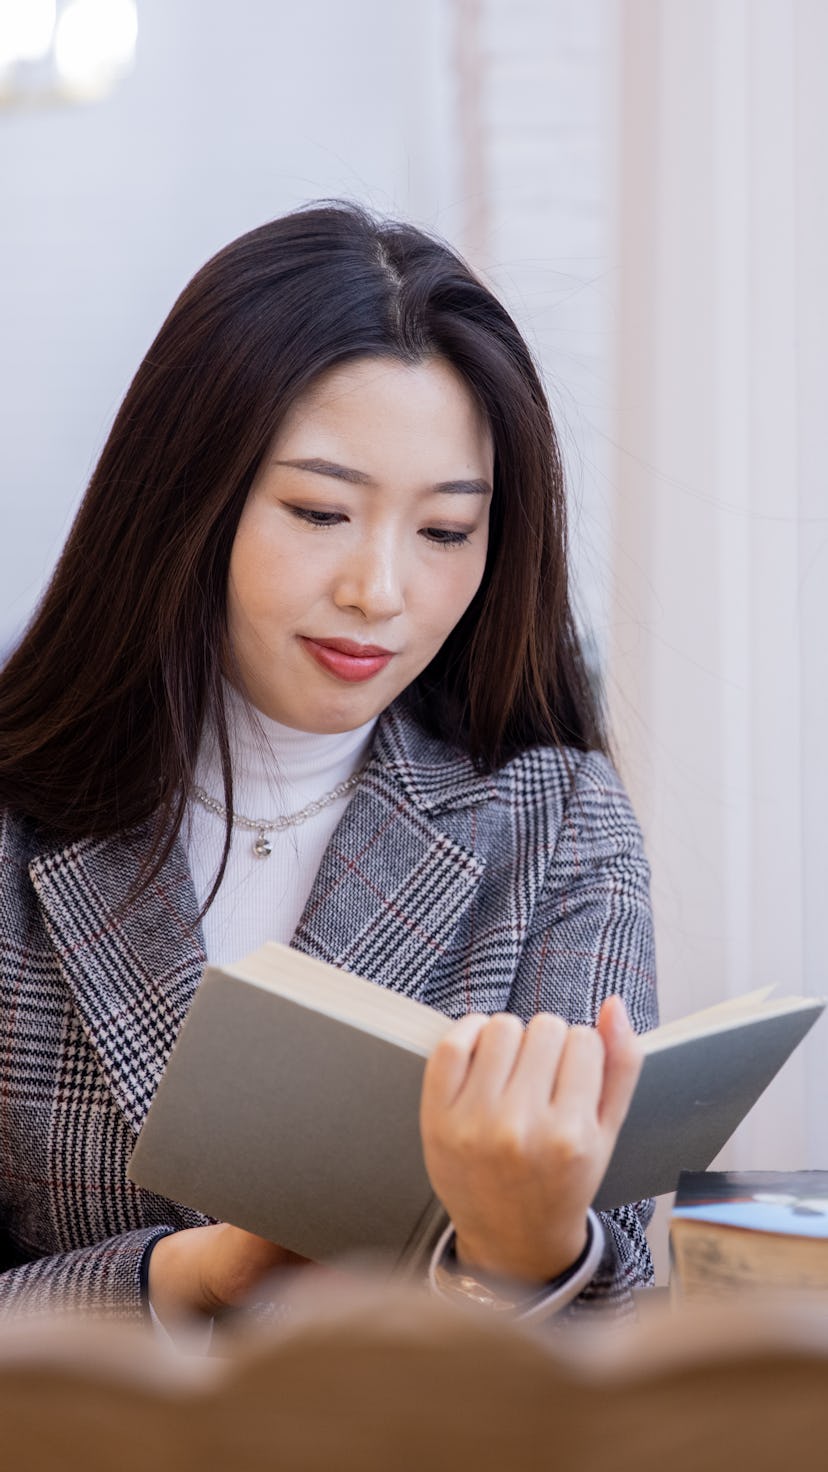 Young asian women reading a book by window